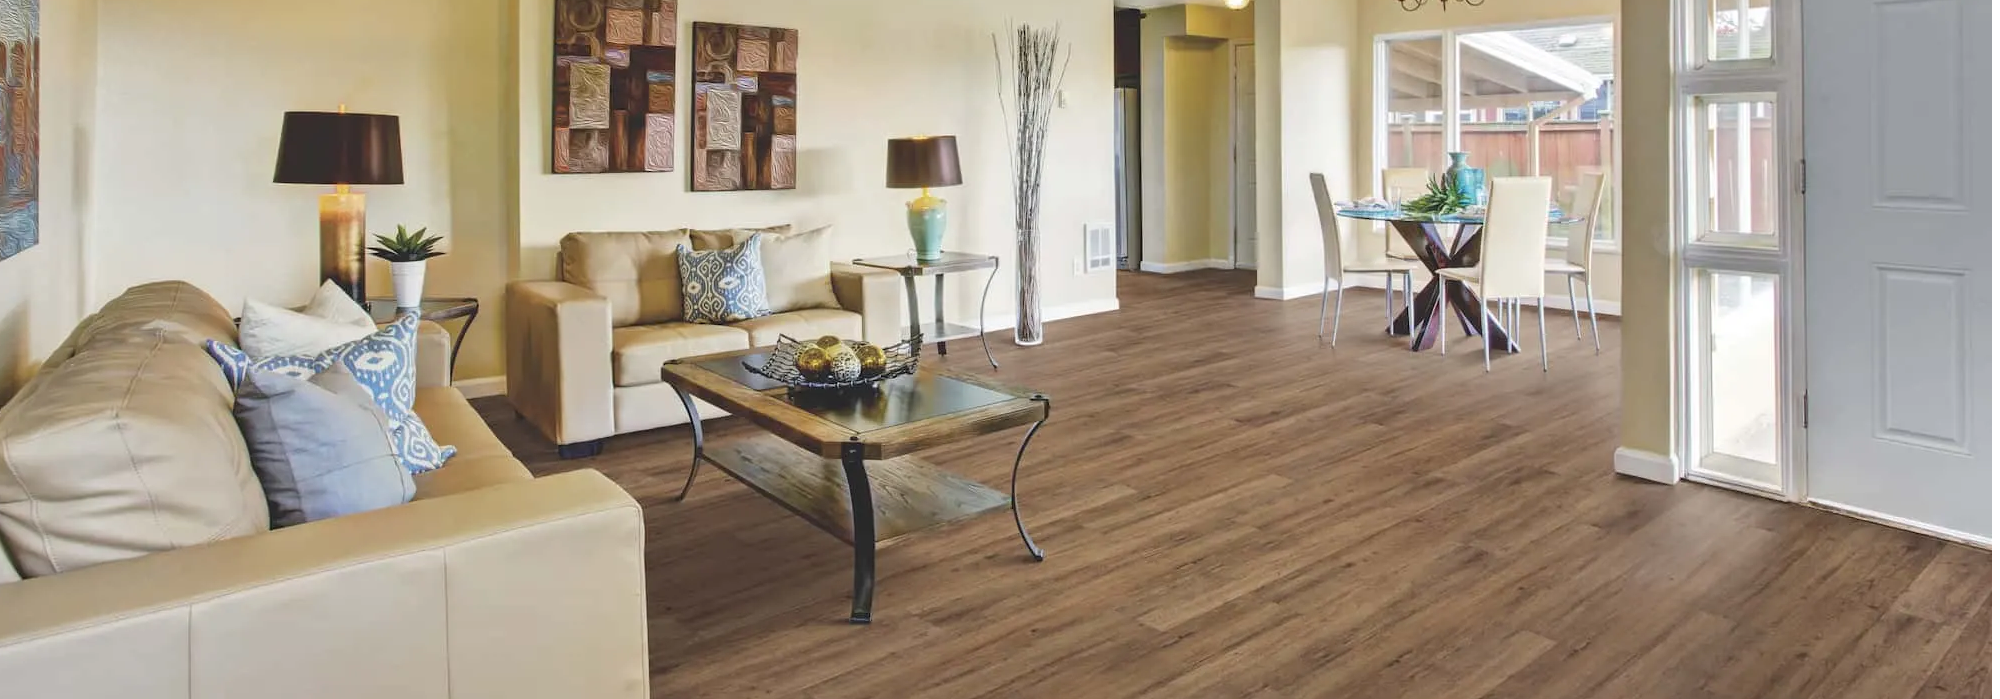 Image of Hardwood Flooring Offered at Kaoud Rugs and Carpet in West Hartford and Manchester, CT